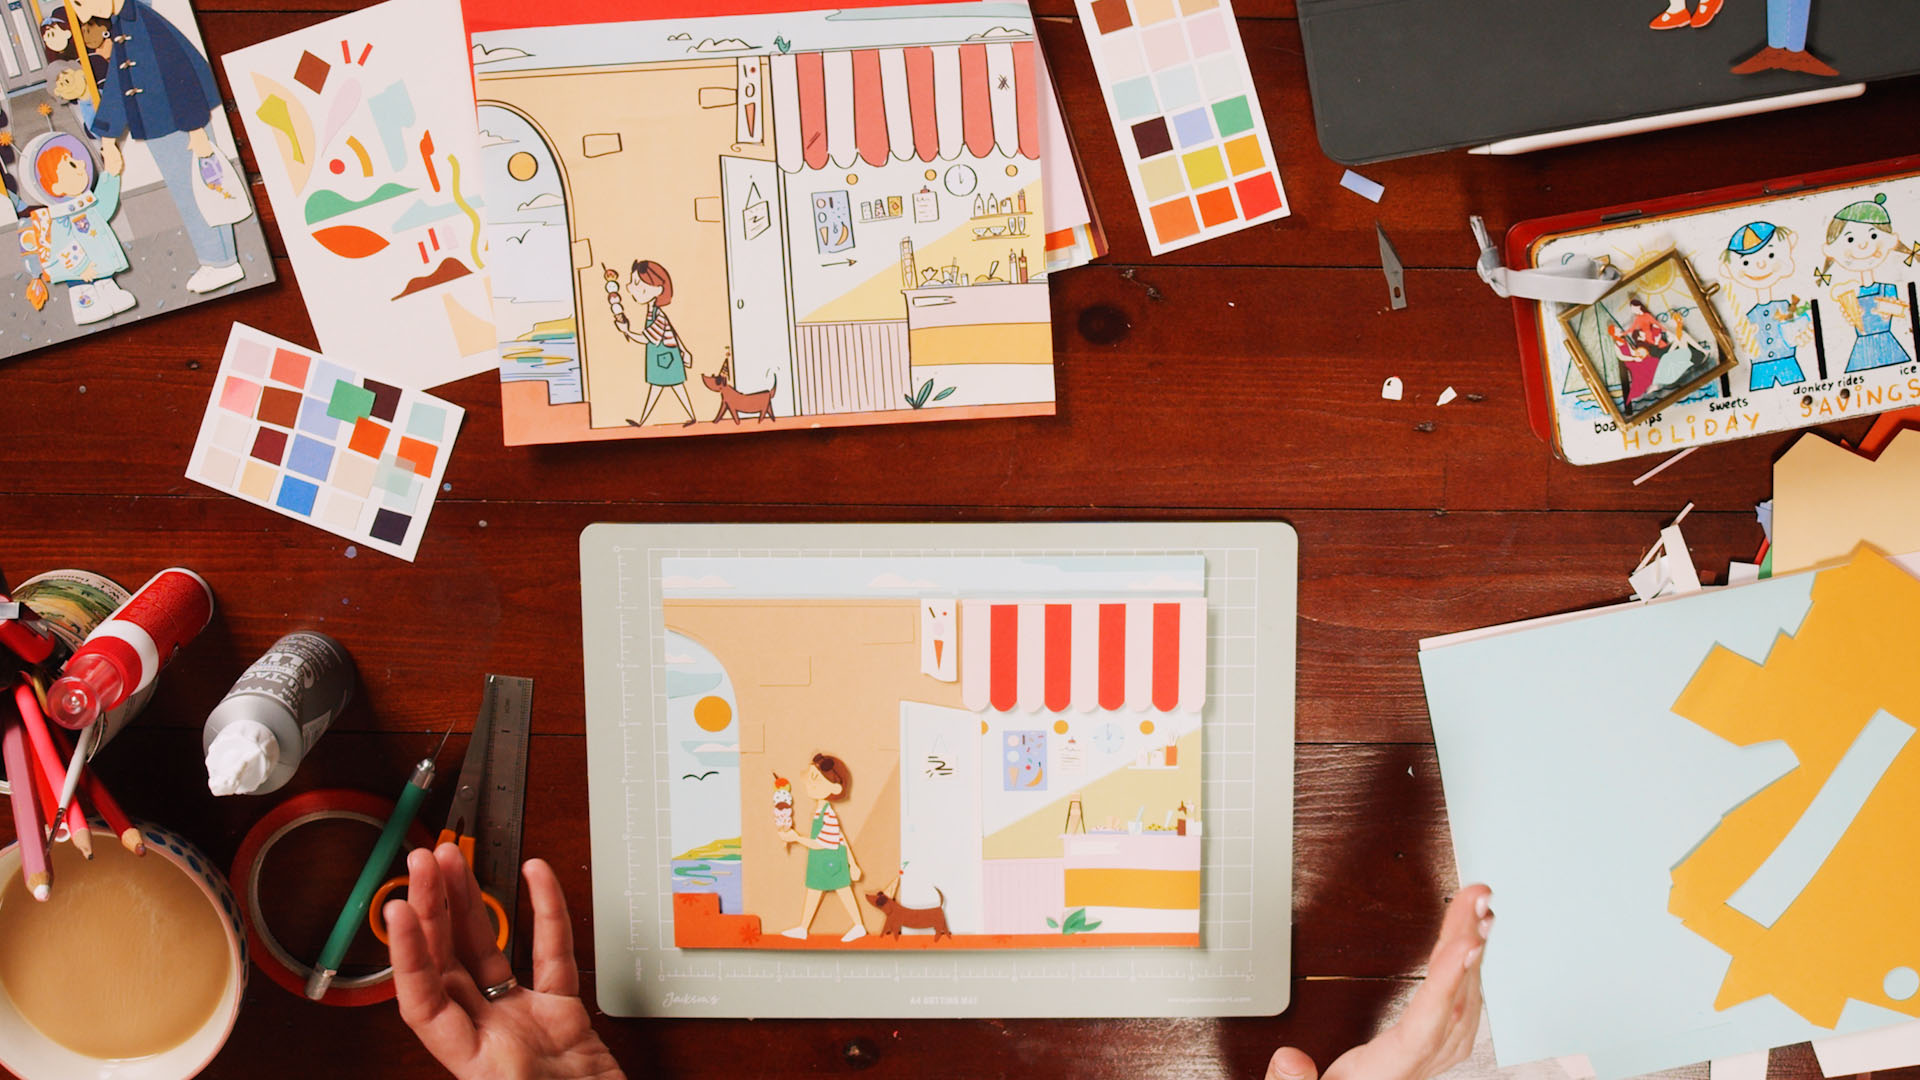 A papercraft vignette shows a little girl holding an ice cream cone after leaving the ice cream shop with her dog. The artwork is surrounded by the tools and materials needed to create it such as scraps of paper, a mug of colored pencils, scissors, tape, and the inspiration image.